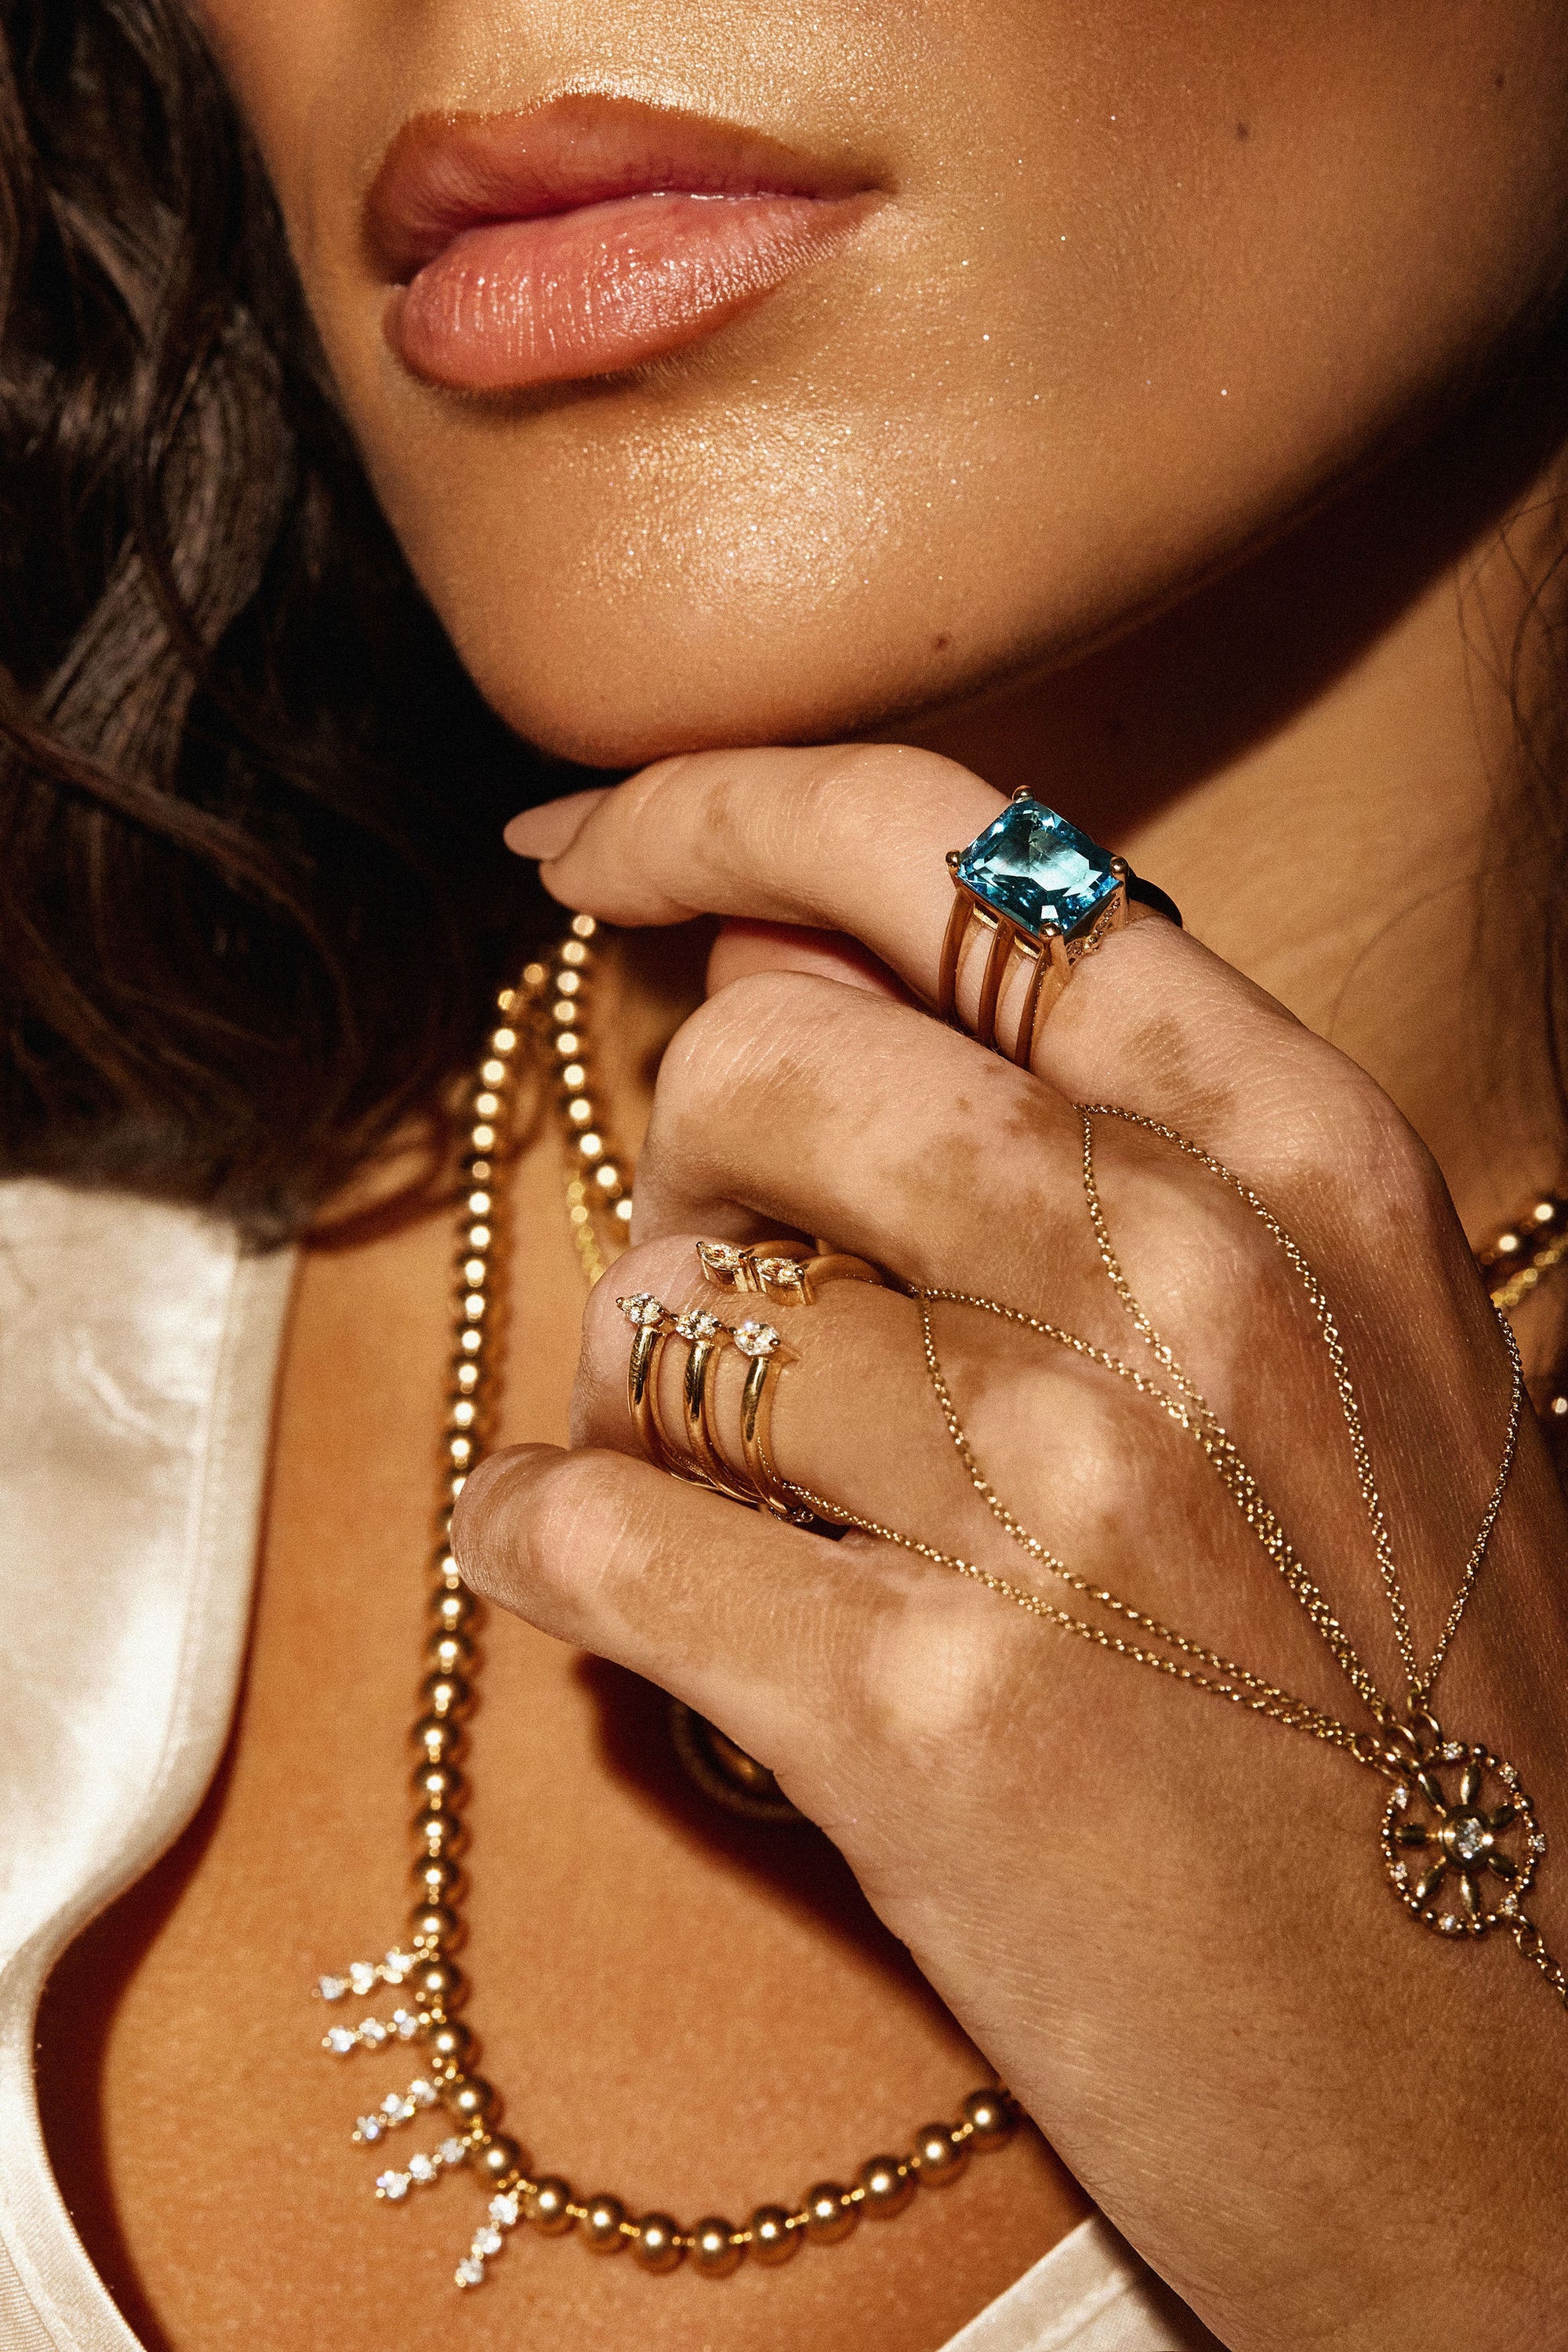 Close-up of a woman wearing multiple 14K yellow gold rings and necklaces. One of the rings is the Nijma M Fine Jewelry Blue Ice - Blue Topaz Triple Band Yellow Gold Ring, featuring a large blue topaz gemstone, while another has a delicate butterfly design. She also wears layered gold necklaces with one featuring a star-shaped pendant adorned with natural diamonds.